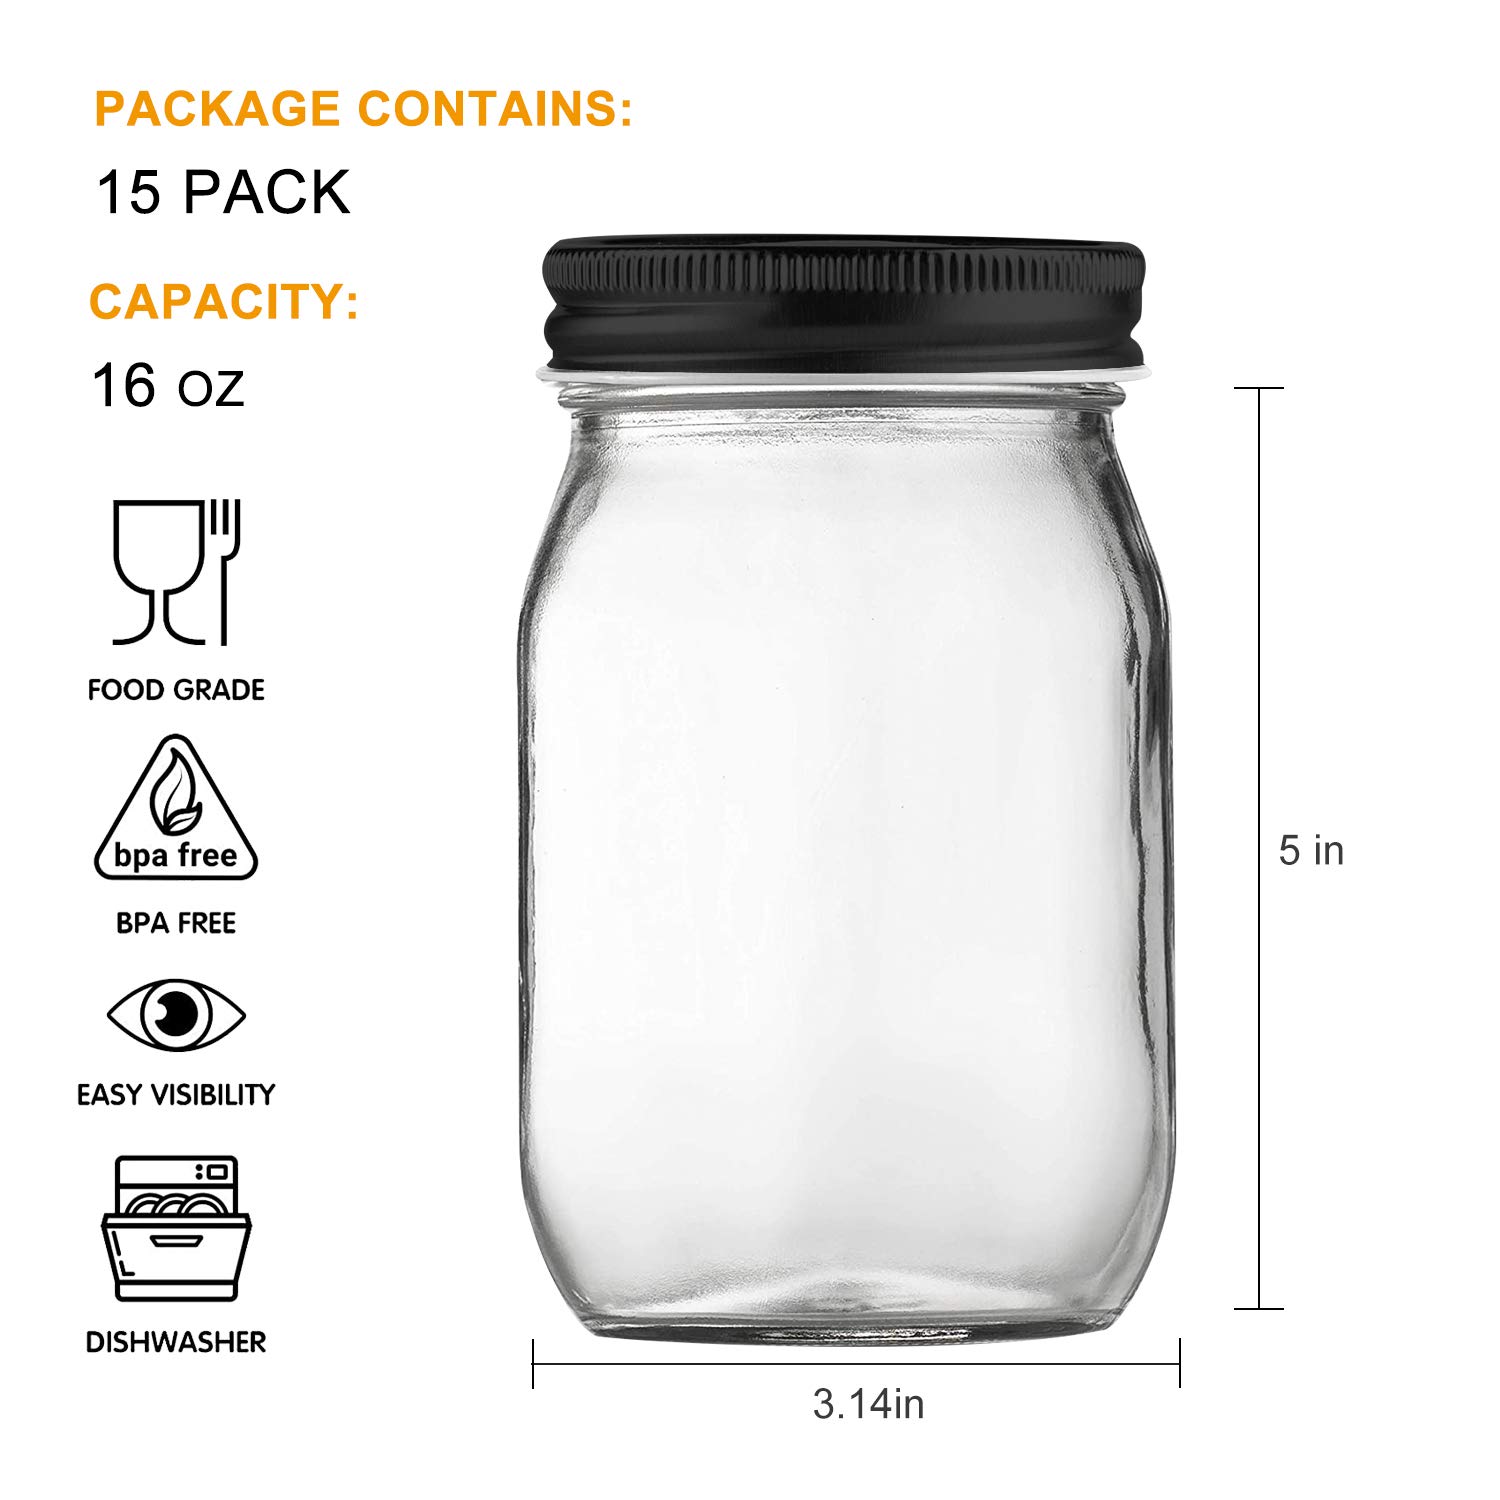 QAPPDA 16 oz Glass Jars With Lids, Wide Mouth Ball Mason Jars,Glass Storage Jars For Food,Canning Jars For Pickles,Herb,Jelly,Jams,Honey,Kitchen Canisters Dishware Safe 15 Pack